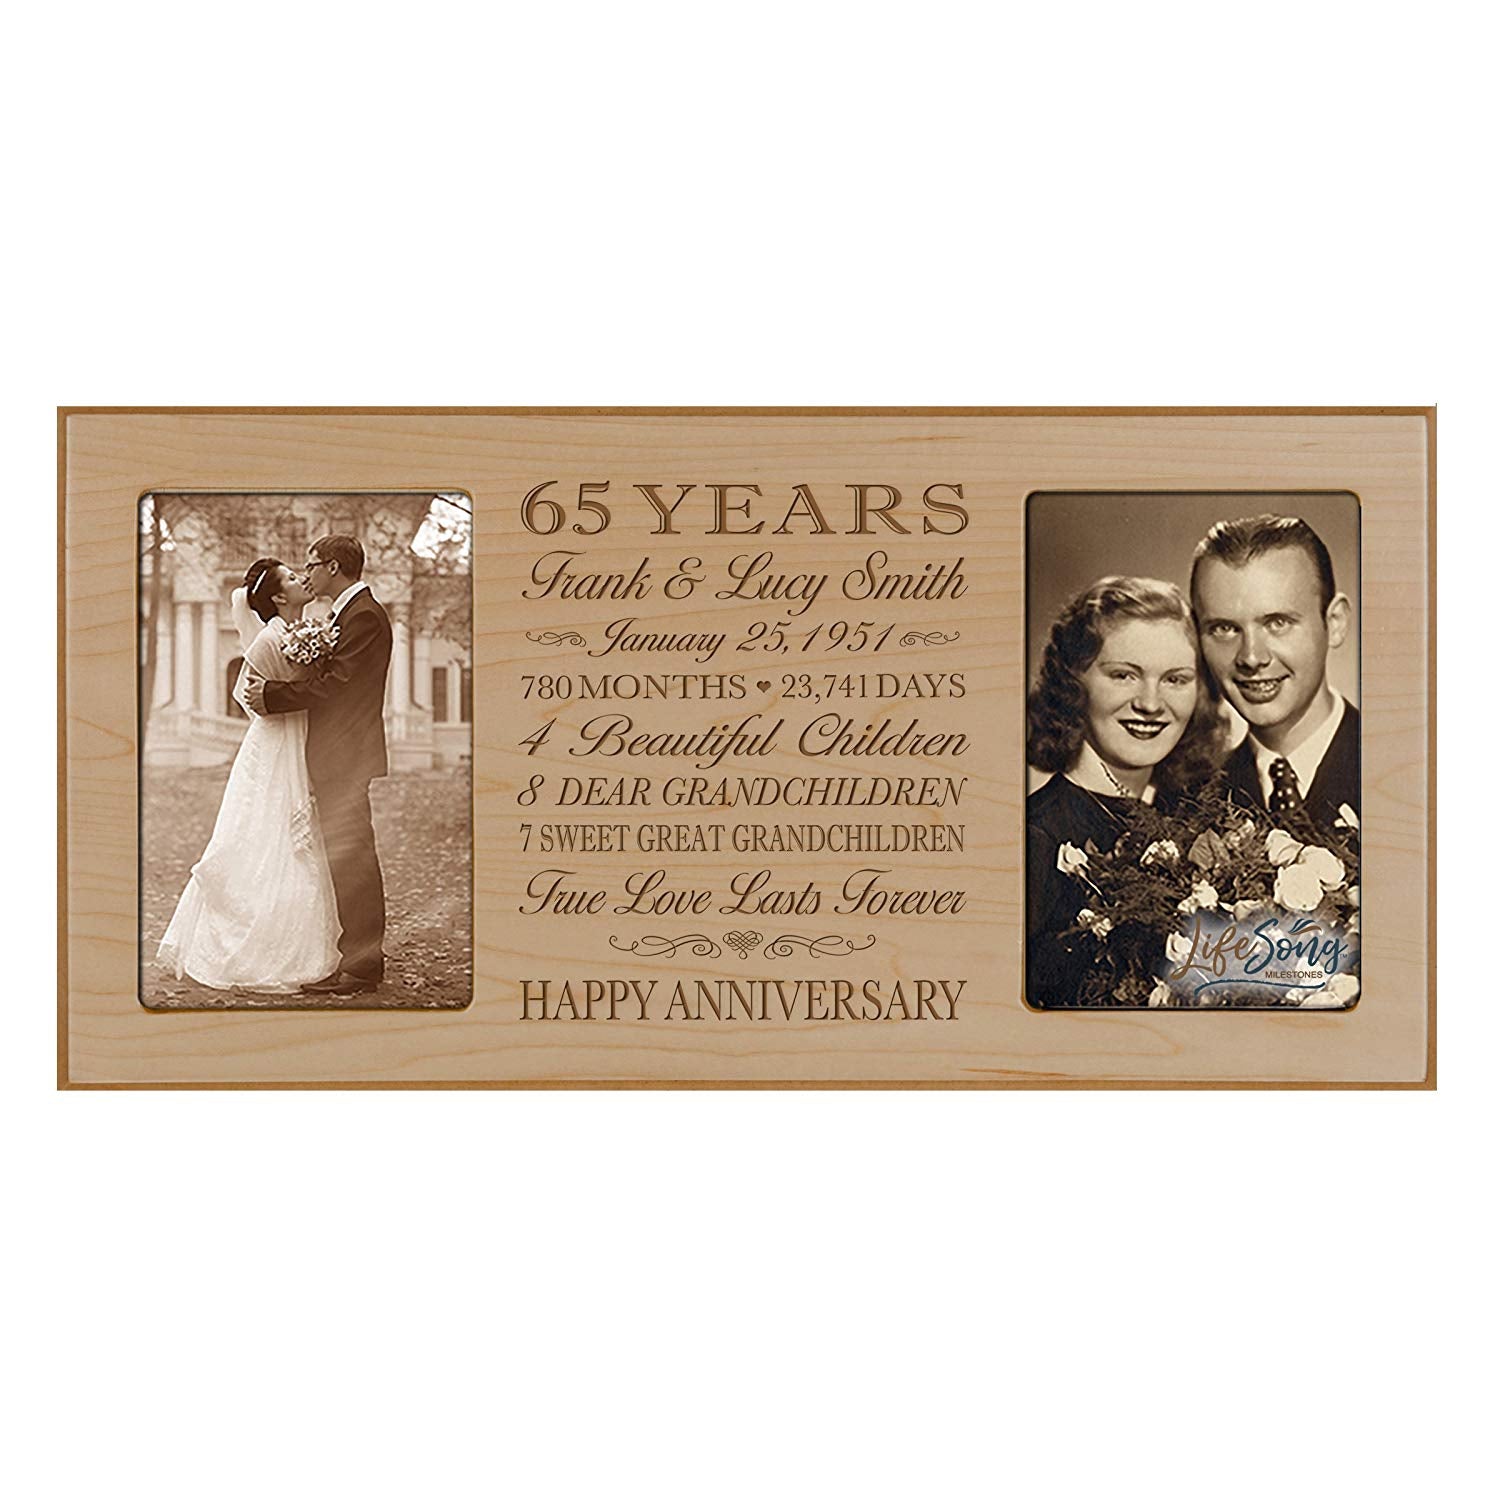 Personalized Anniversary Double Photo Frame - 65 Years - LifeSong Milestones